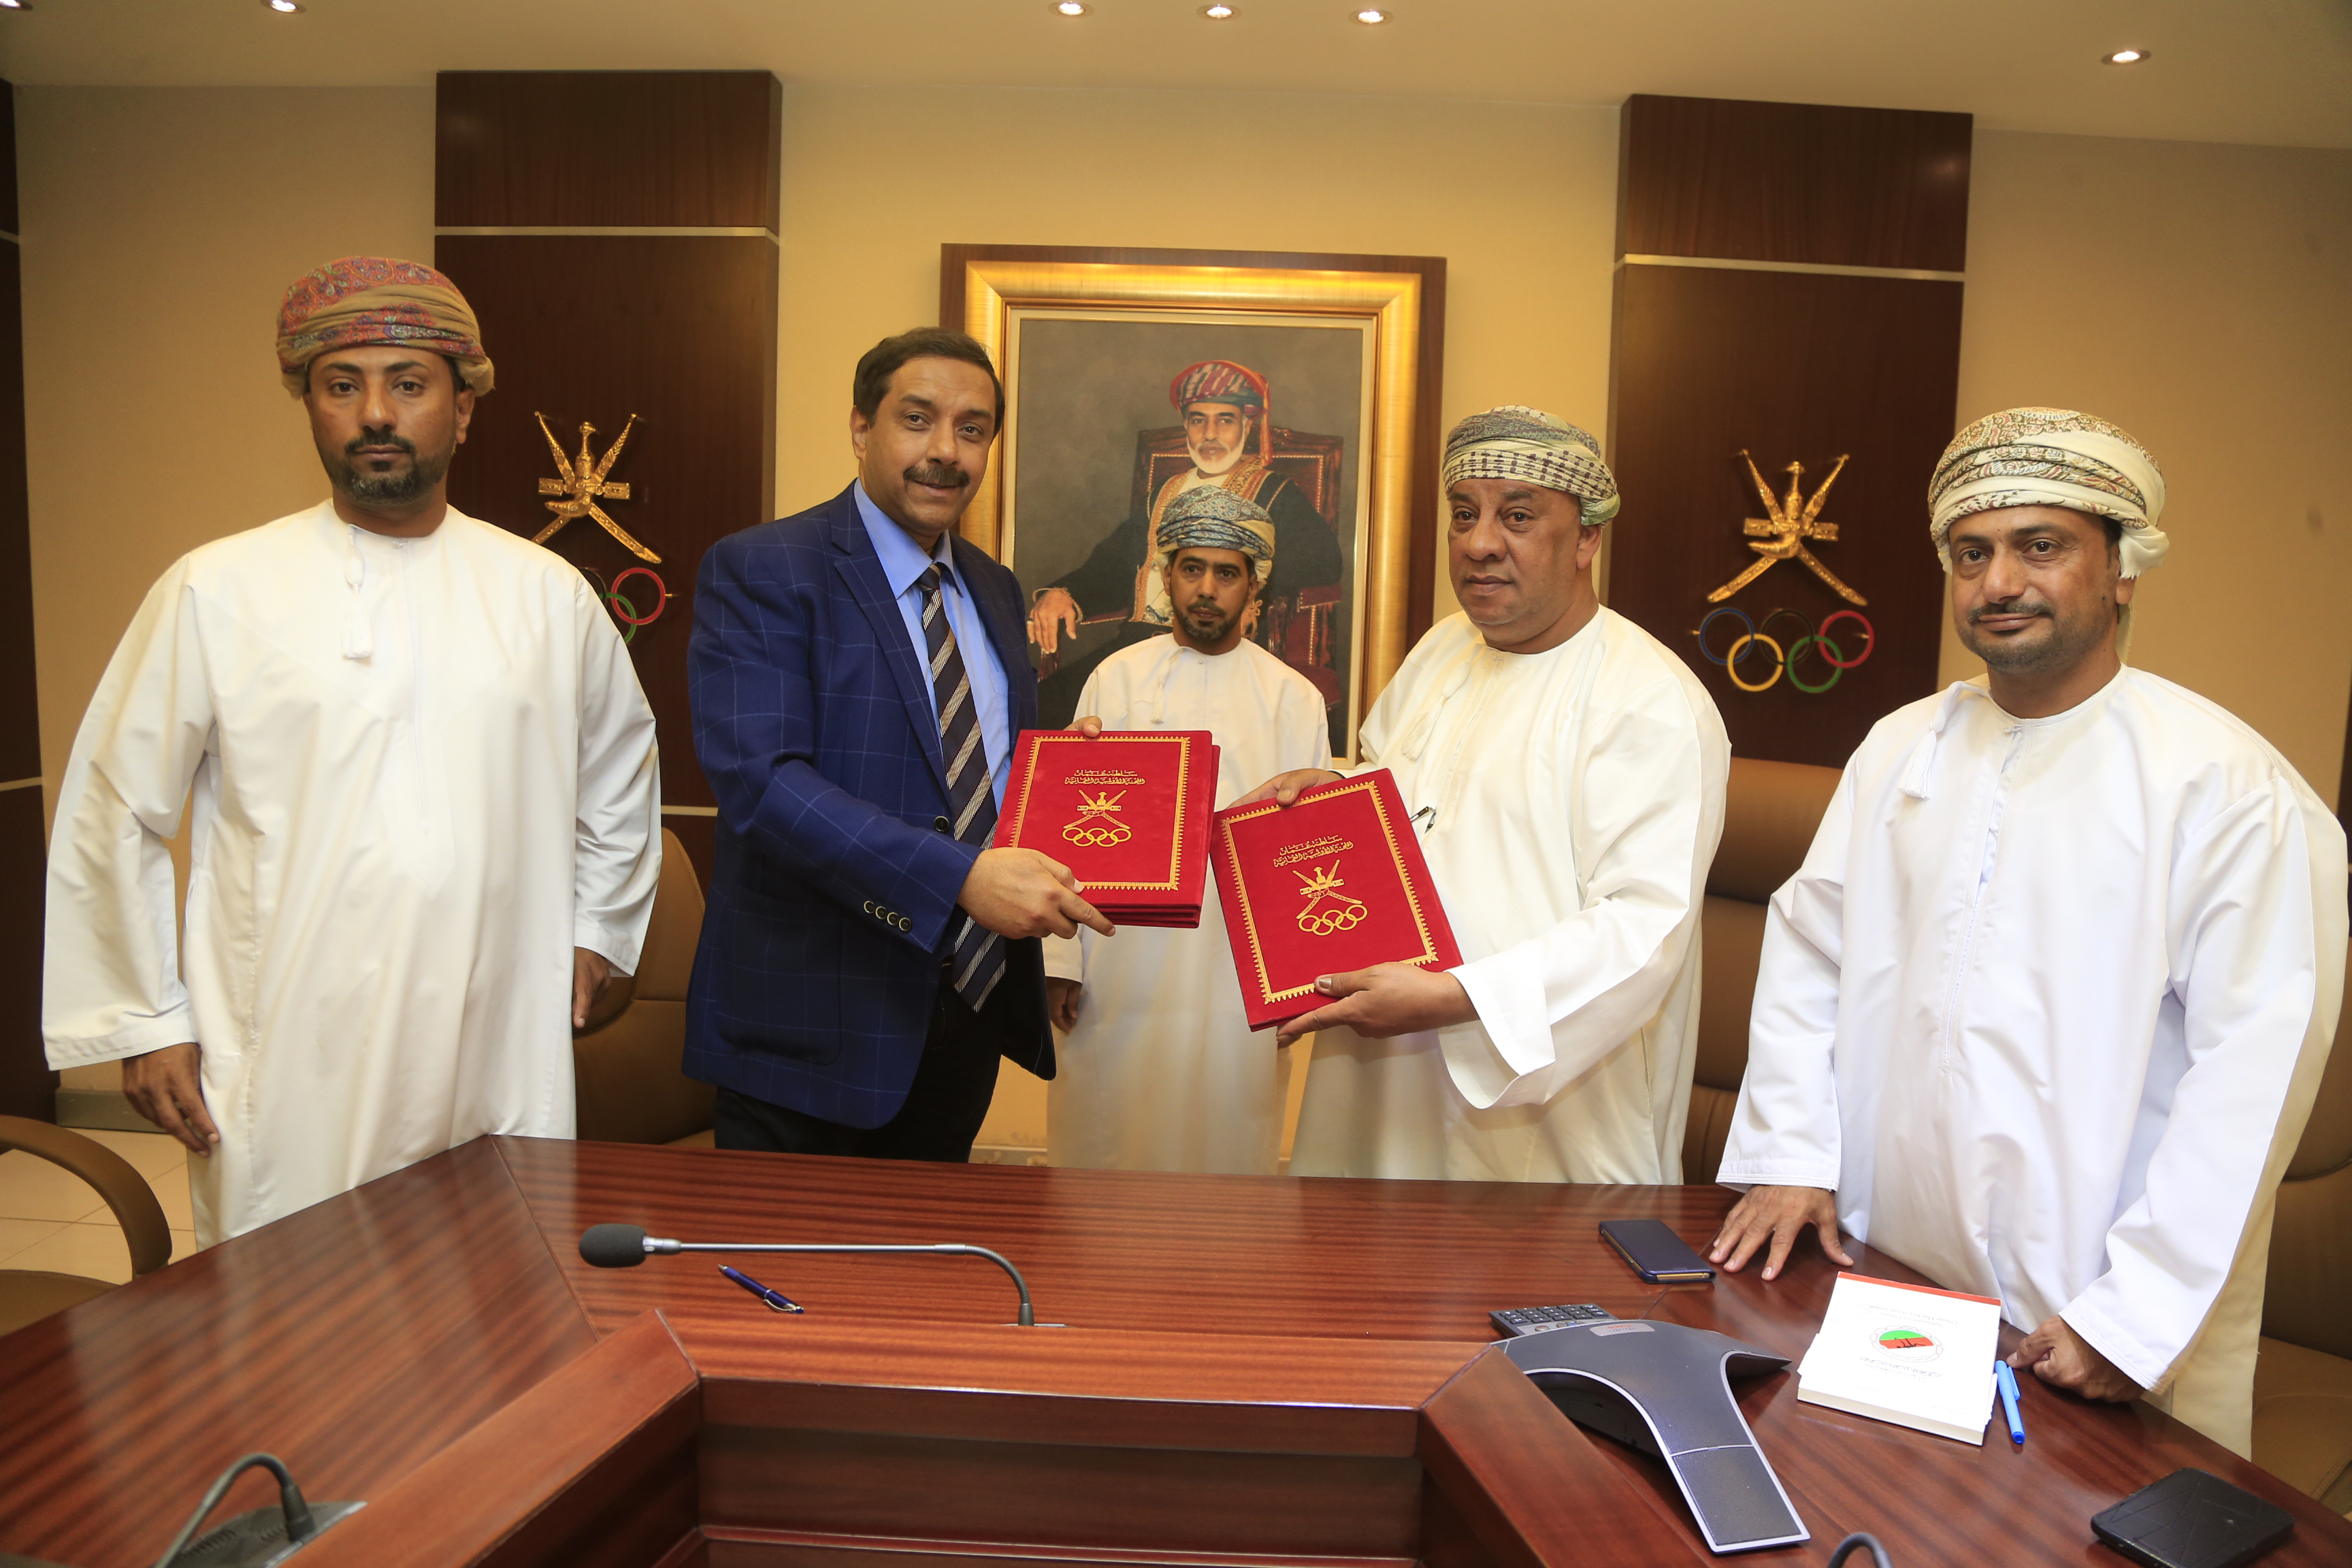 AHF to assist OHA in overall development of Oman hockey